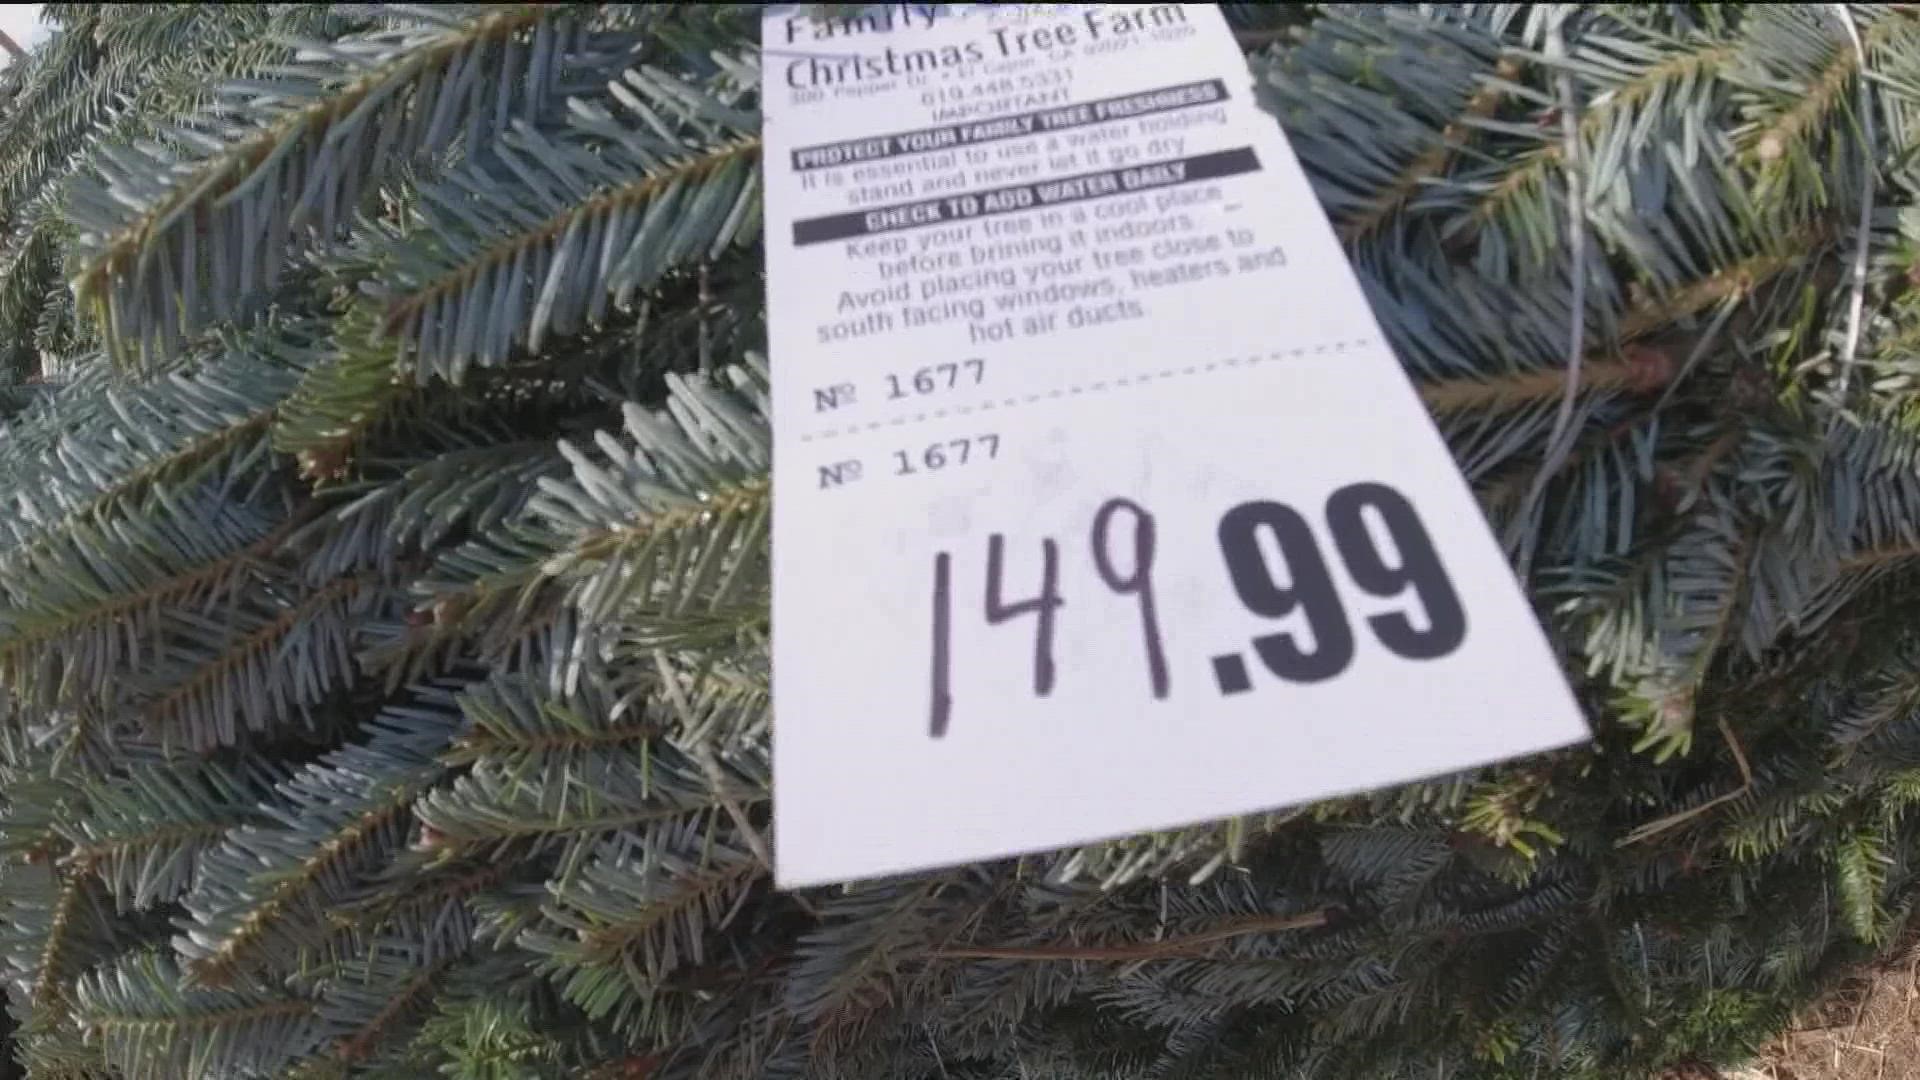 Consumers can expect to pay about $20 more for a real tree.